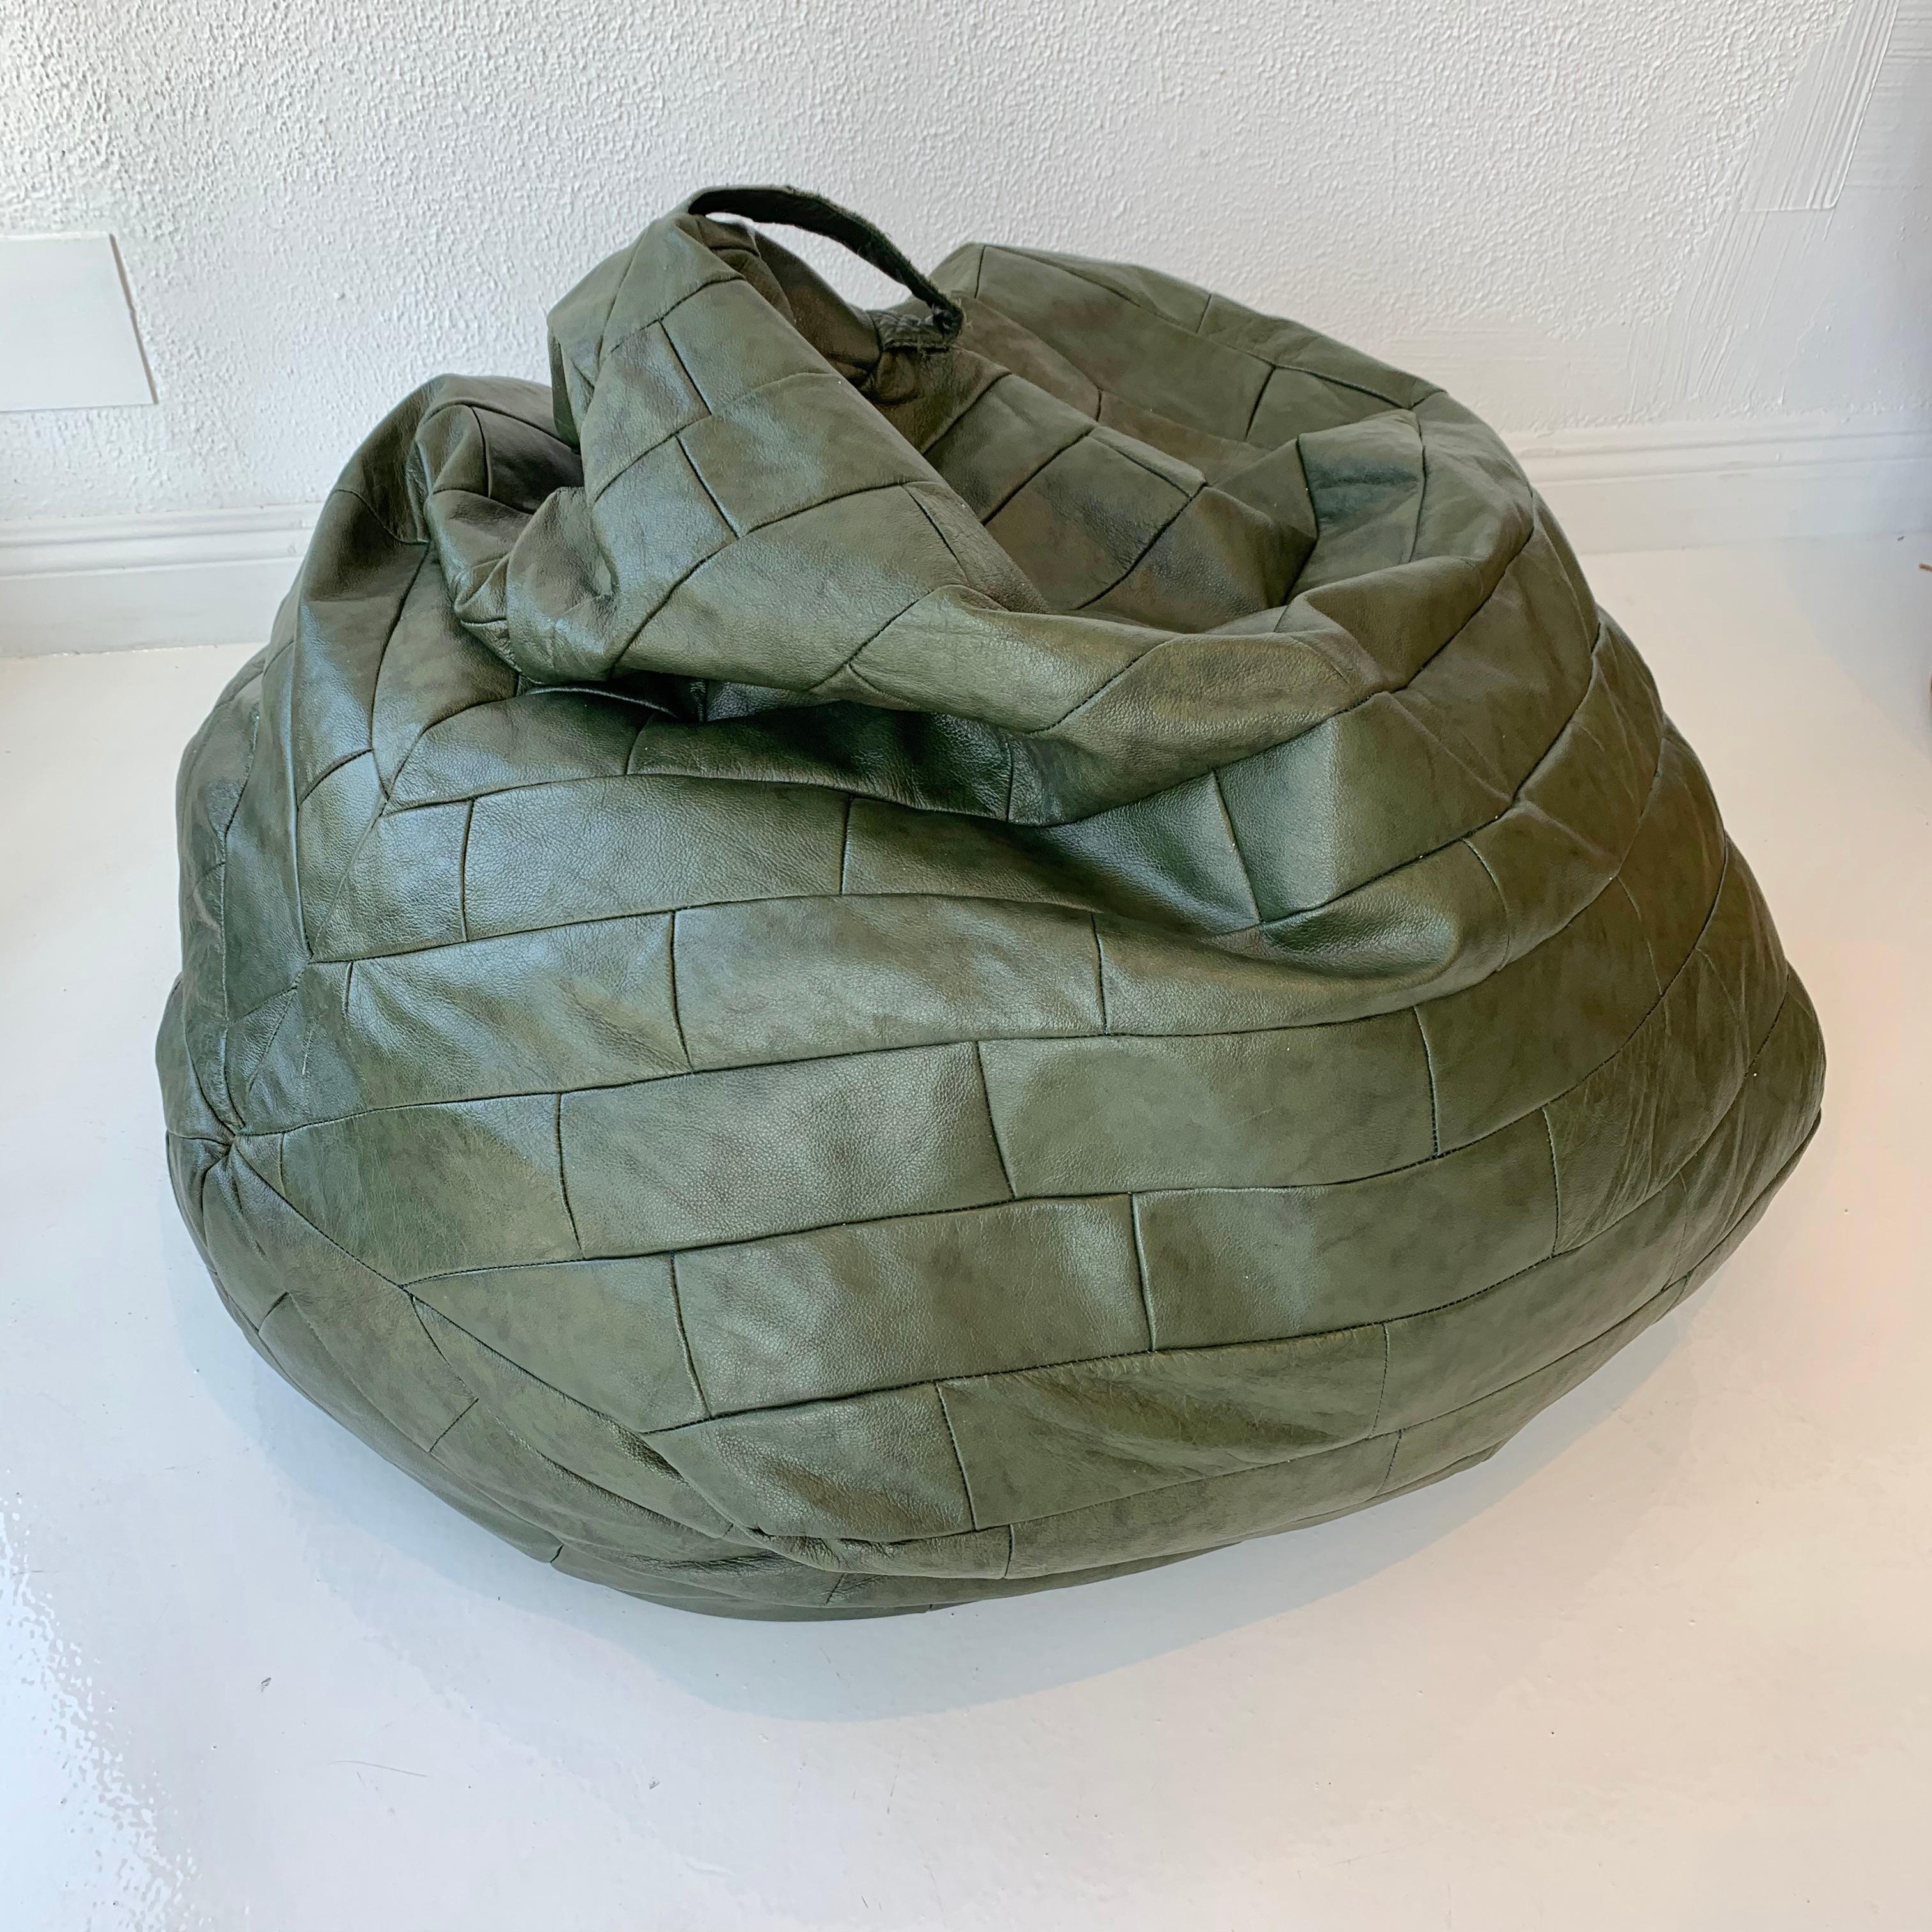 Late 20th Century De Sede Patchwork Leather Bean Bag in Army Green